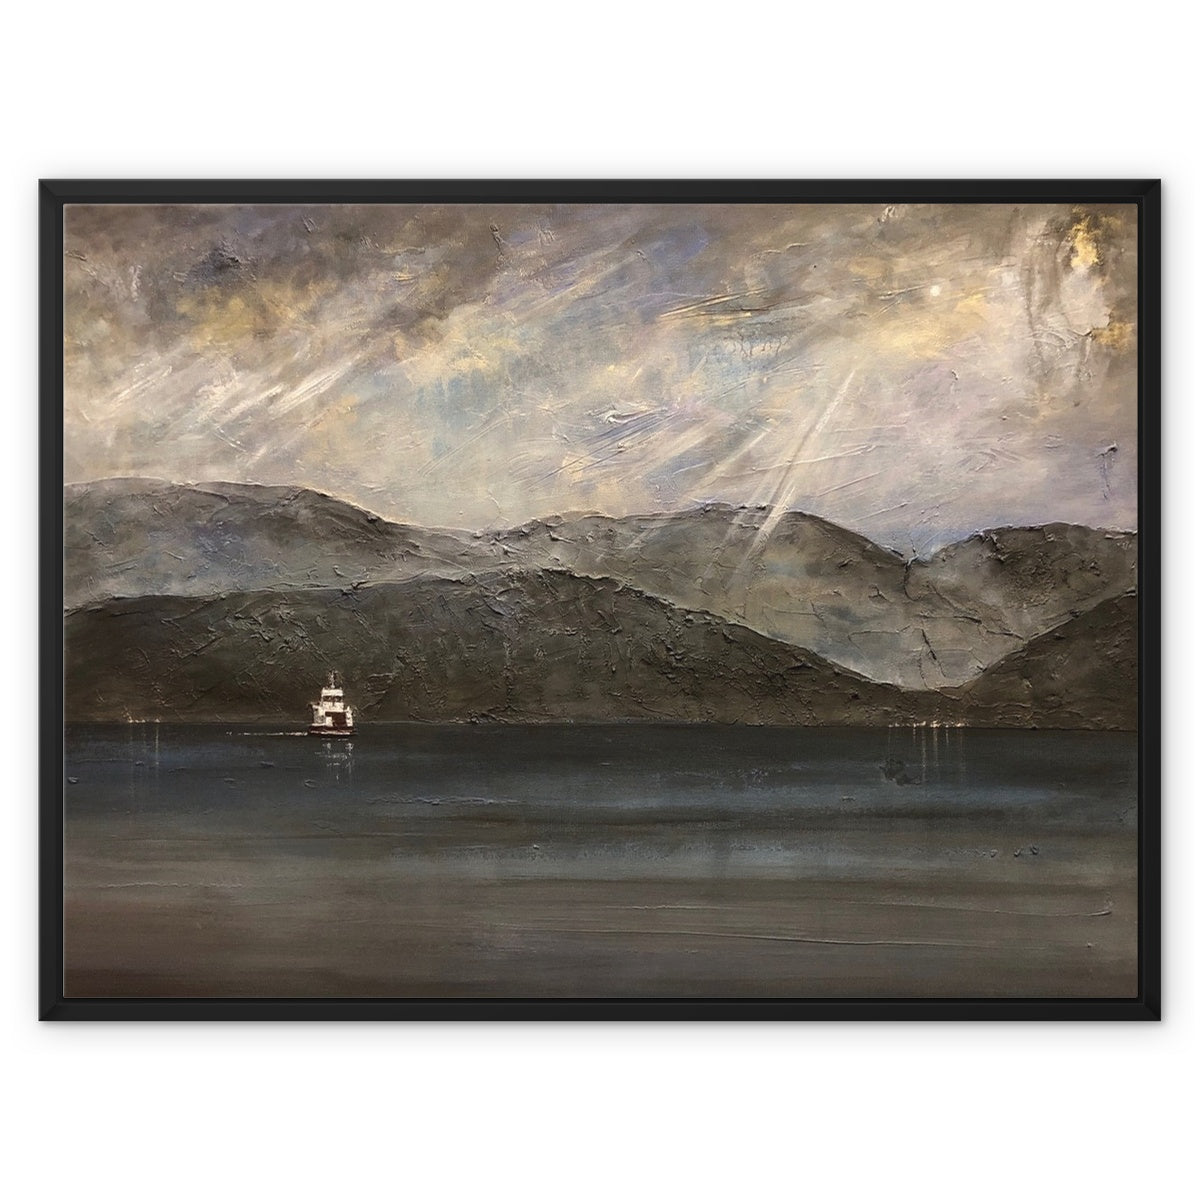 Lochranza Moonlit Ferry Painting | Framed Canvas From Scotland-Floating Framed Canvas Prints-Arran Art Gallery-32"x24"-Black Frame-Paintings, Prints, Homeware, Art Gifts From Scotland By Scottish Artist Kevin Hunter